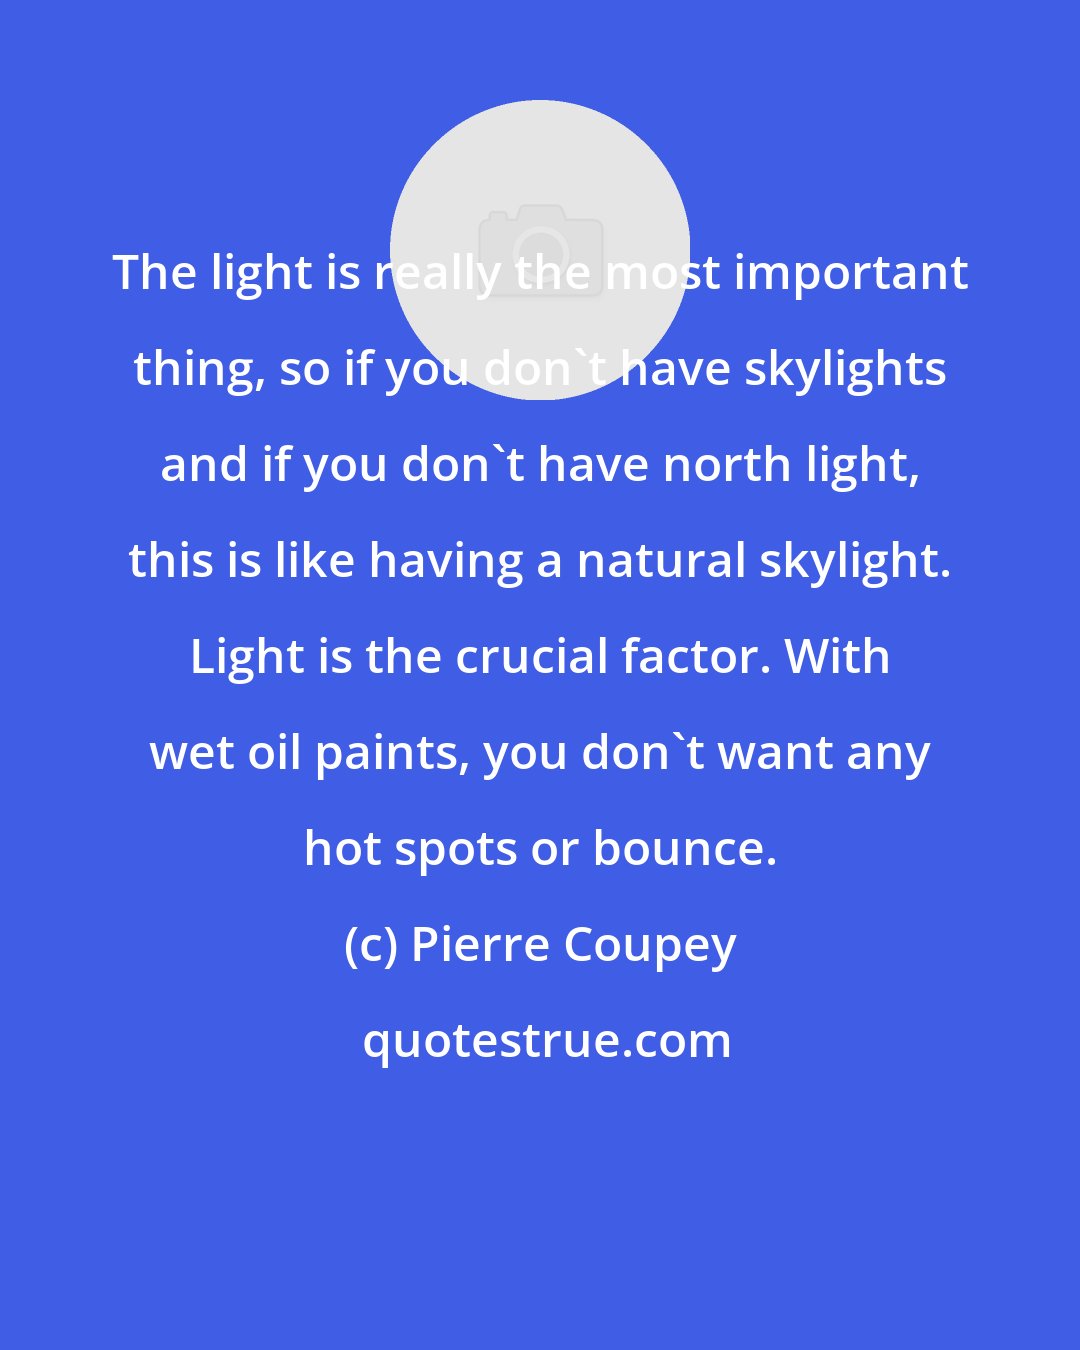 Pierre Coupey: The light is really the most important thing, so if you don't have skylights and if you don't have north light, this is like having a natural skylight. Light is the crucial factor. With wet oil paints, you don't want any hot spots or bounce.